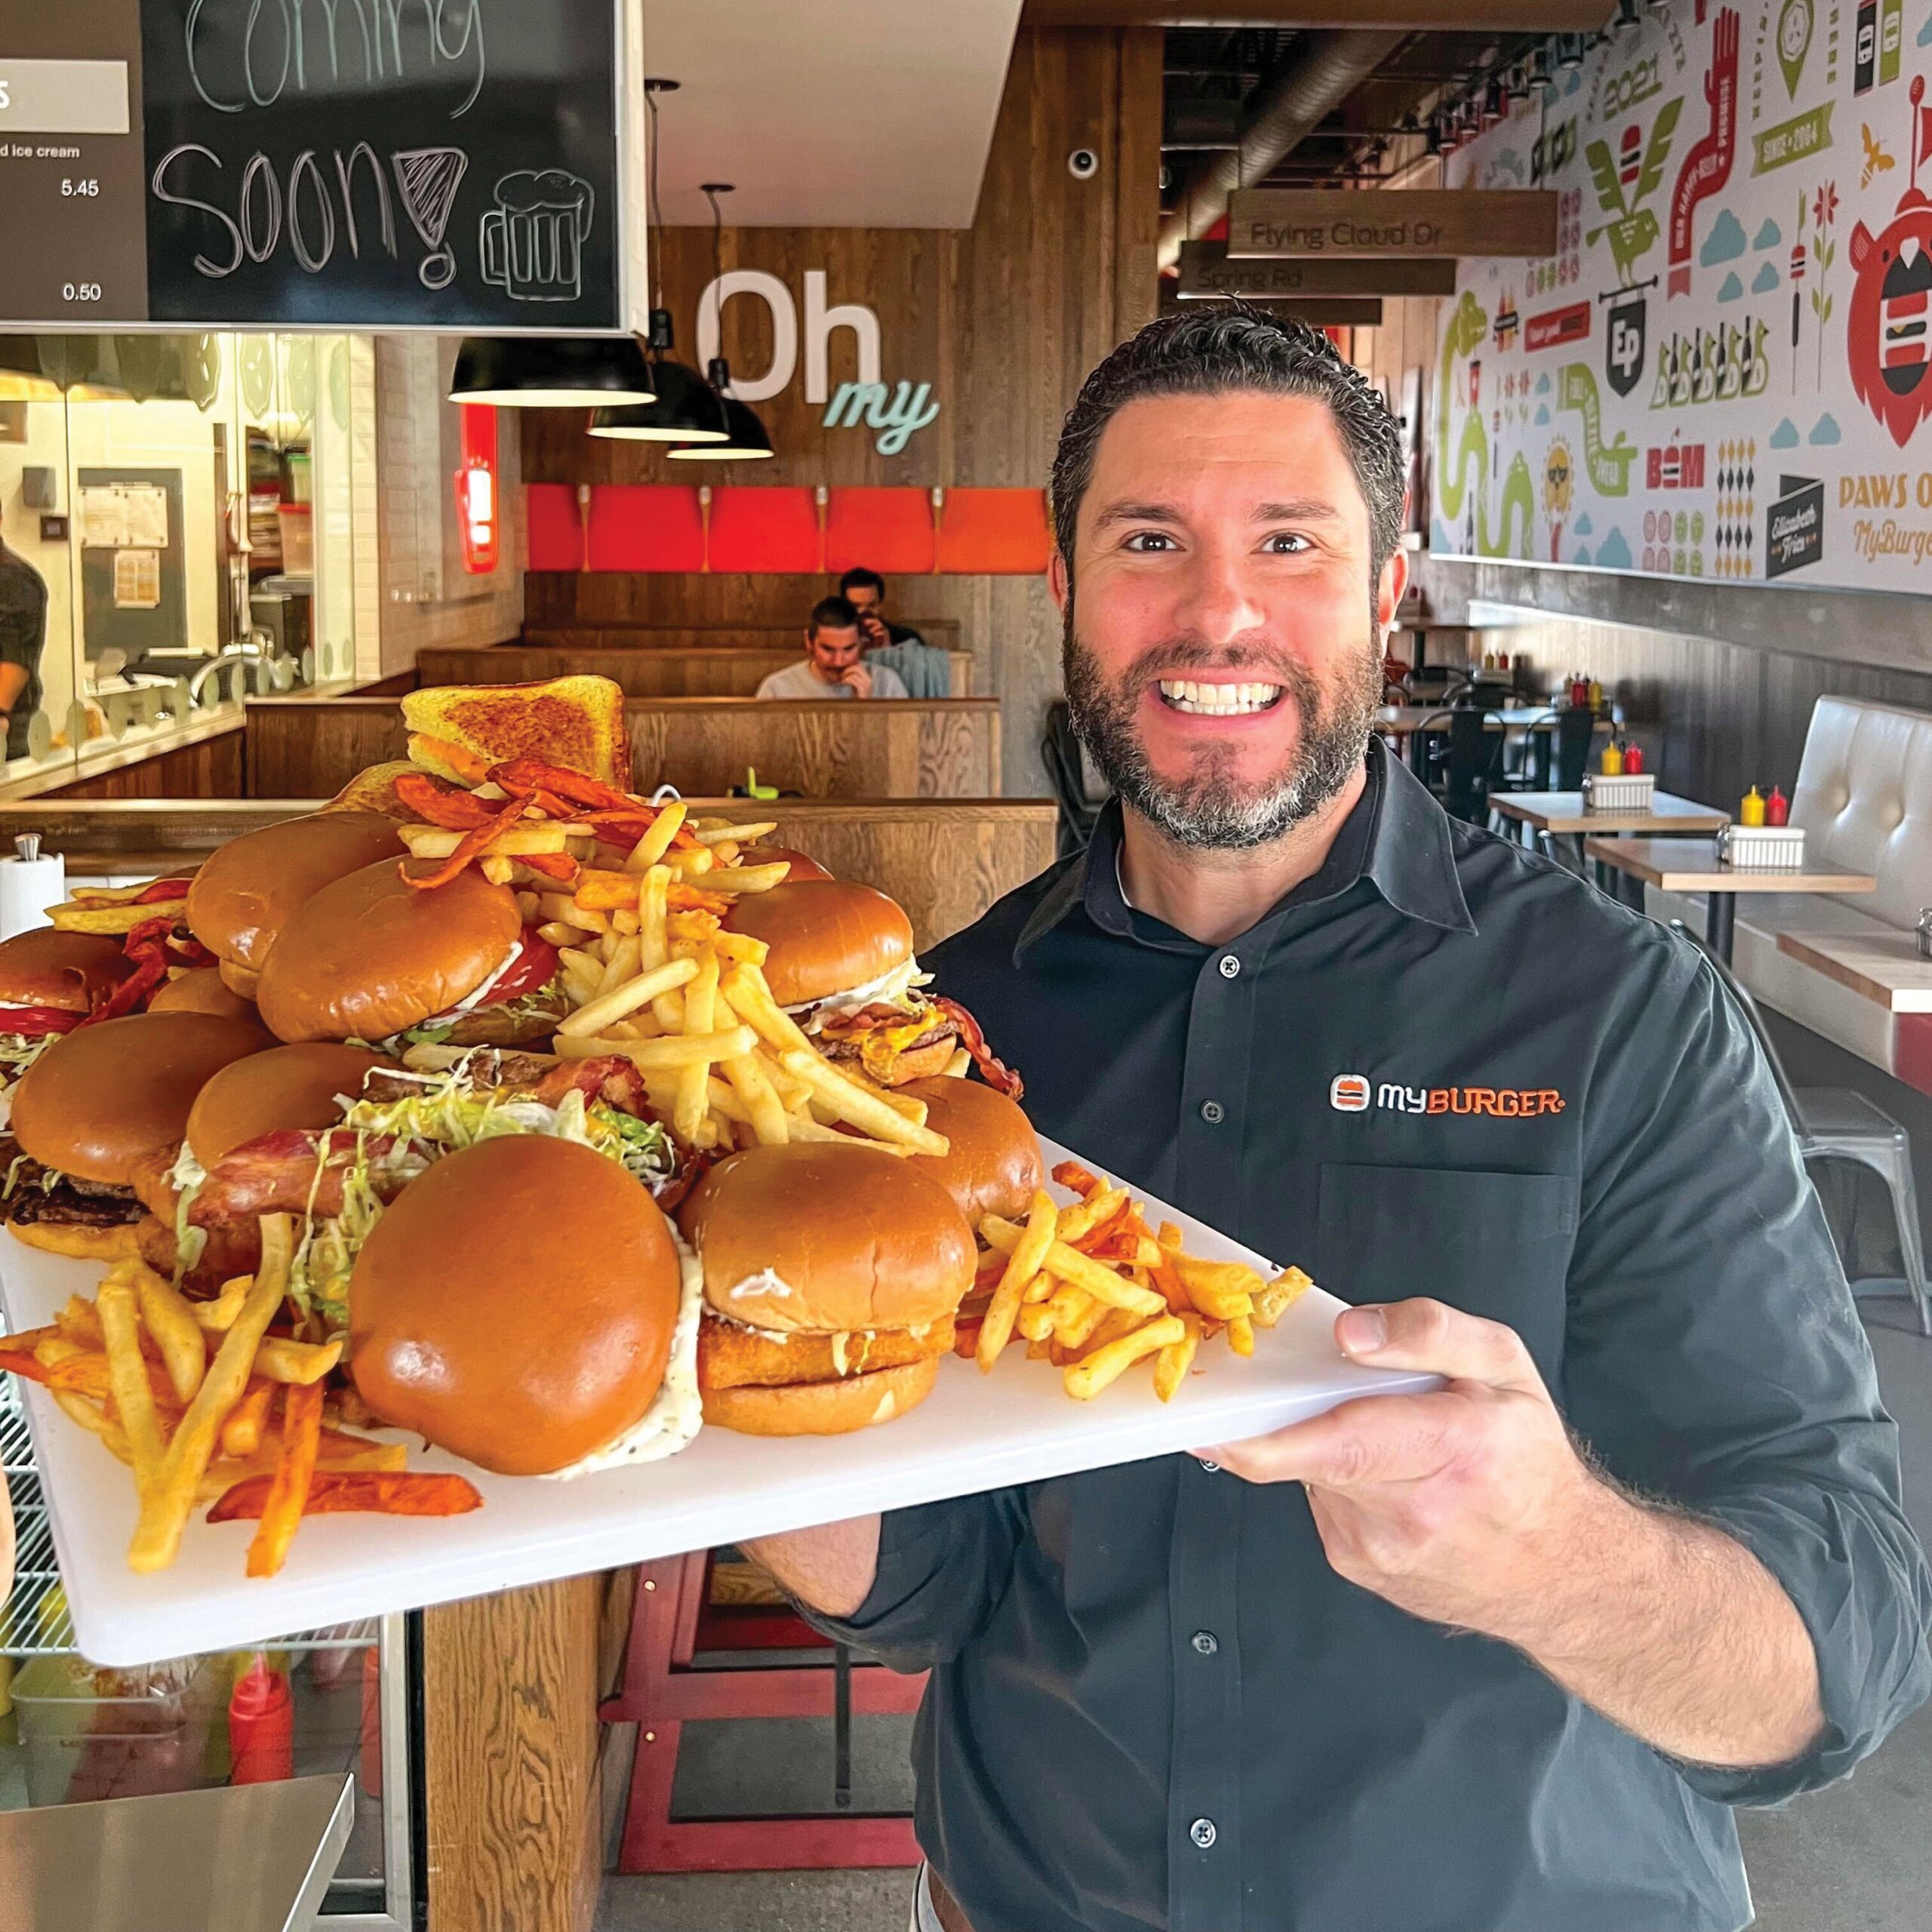 Paul Abdo with a platter of fries and burgers at his My Burger location.